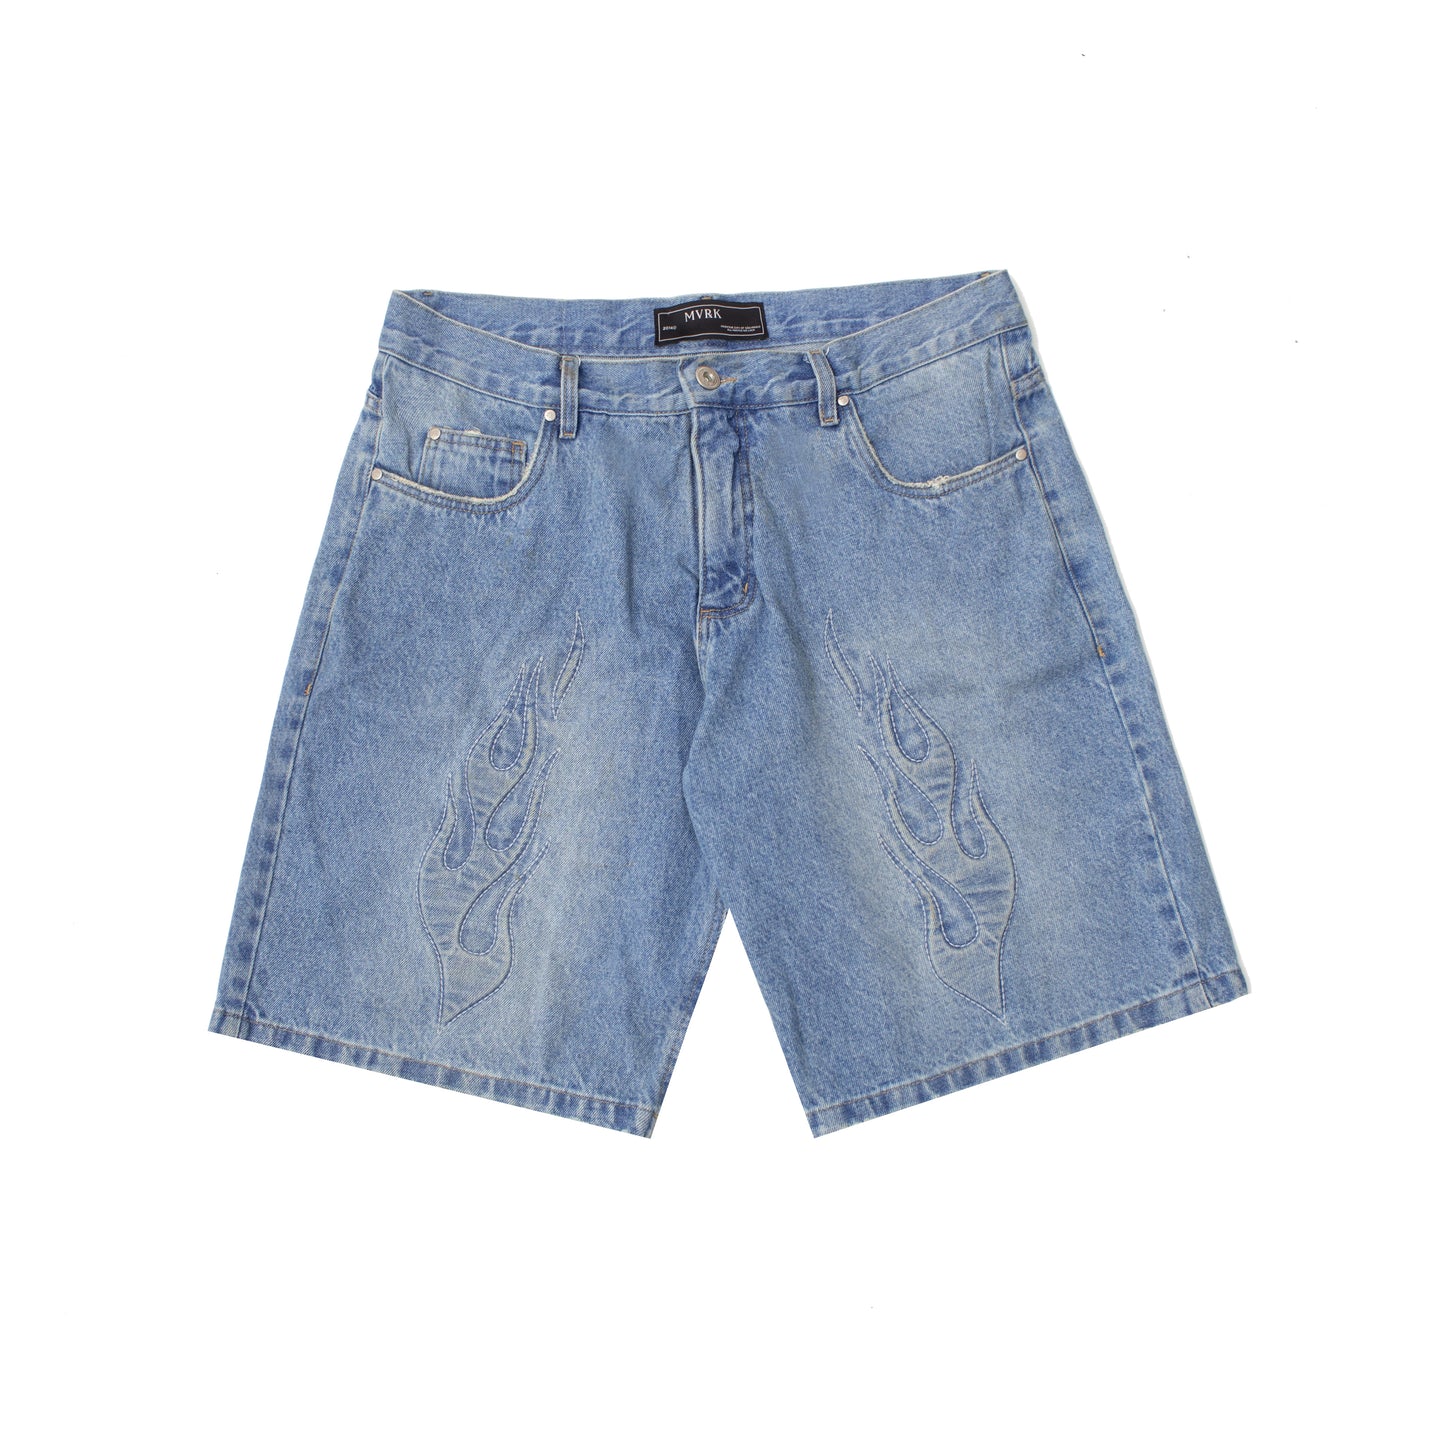 Shorts Jeans Fire MVRK